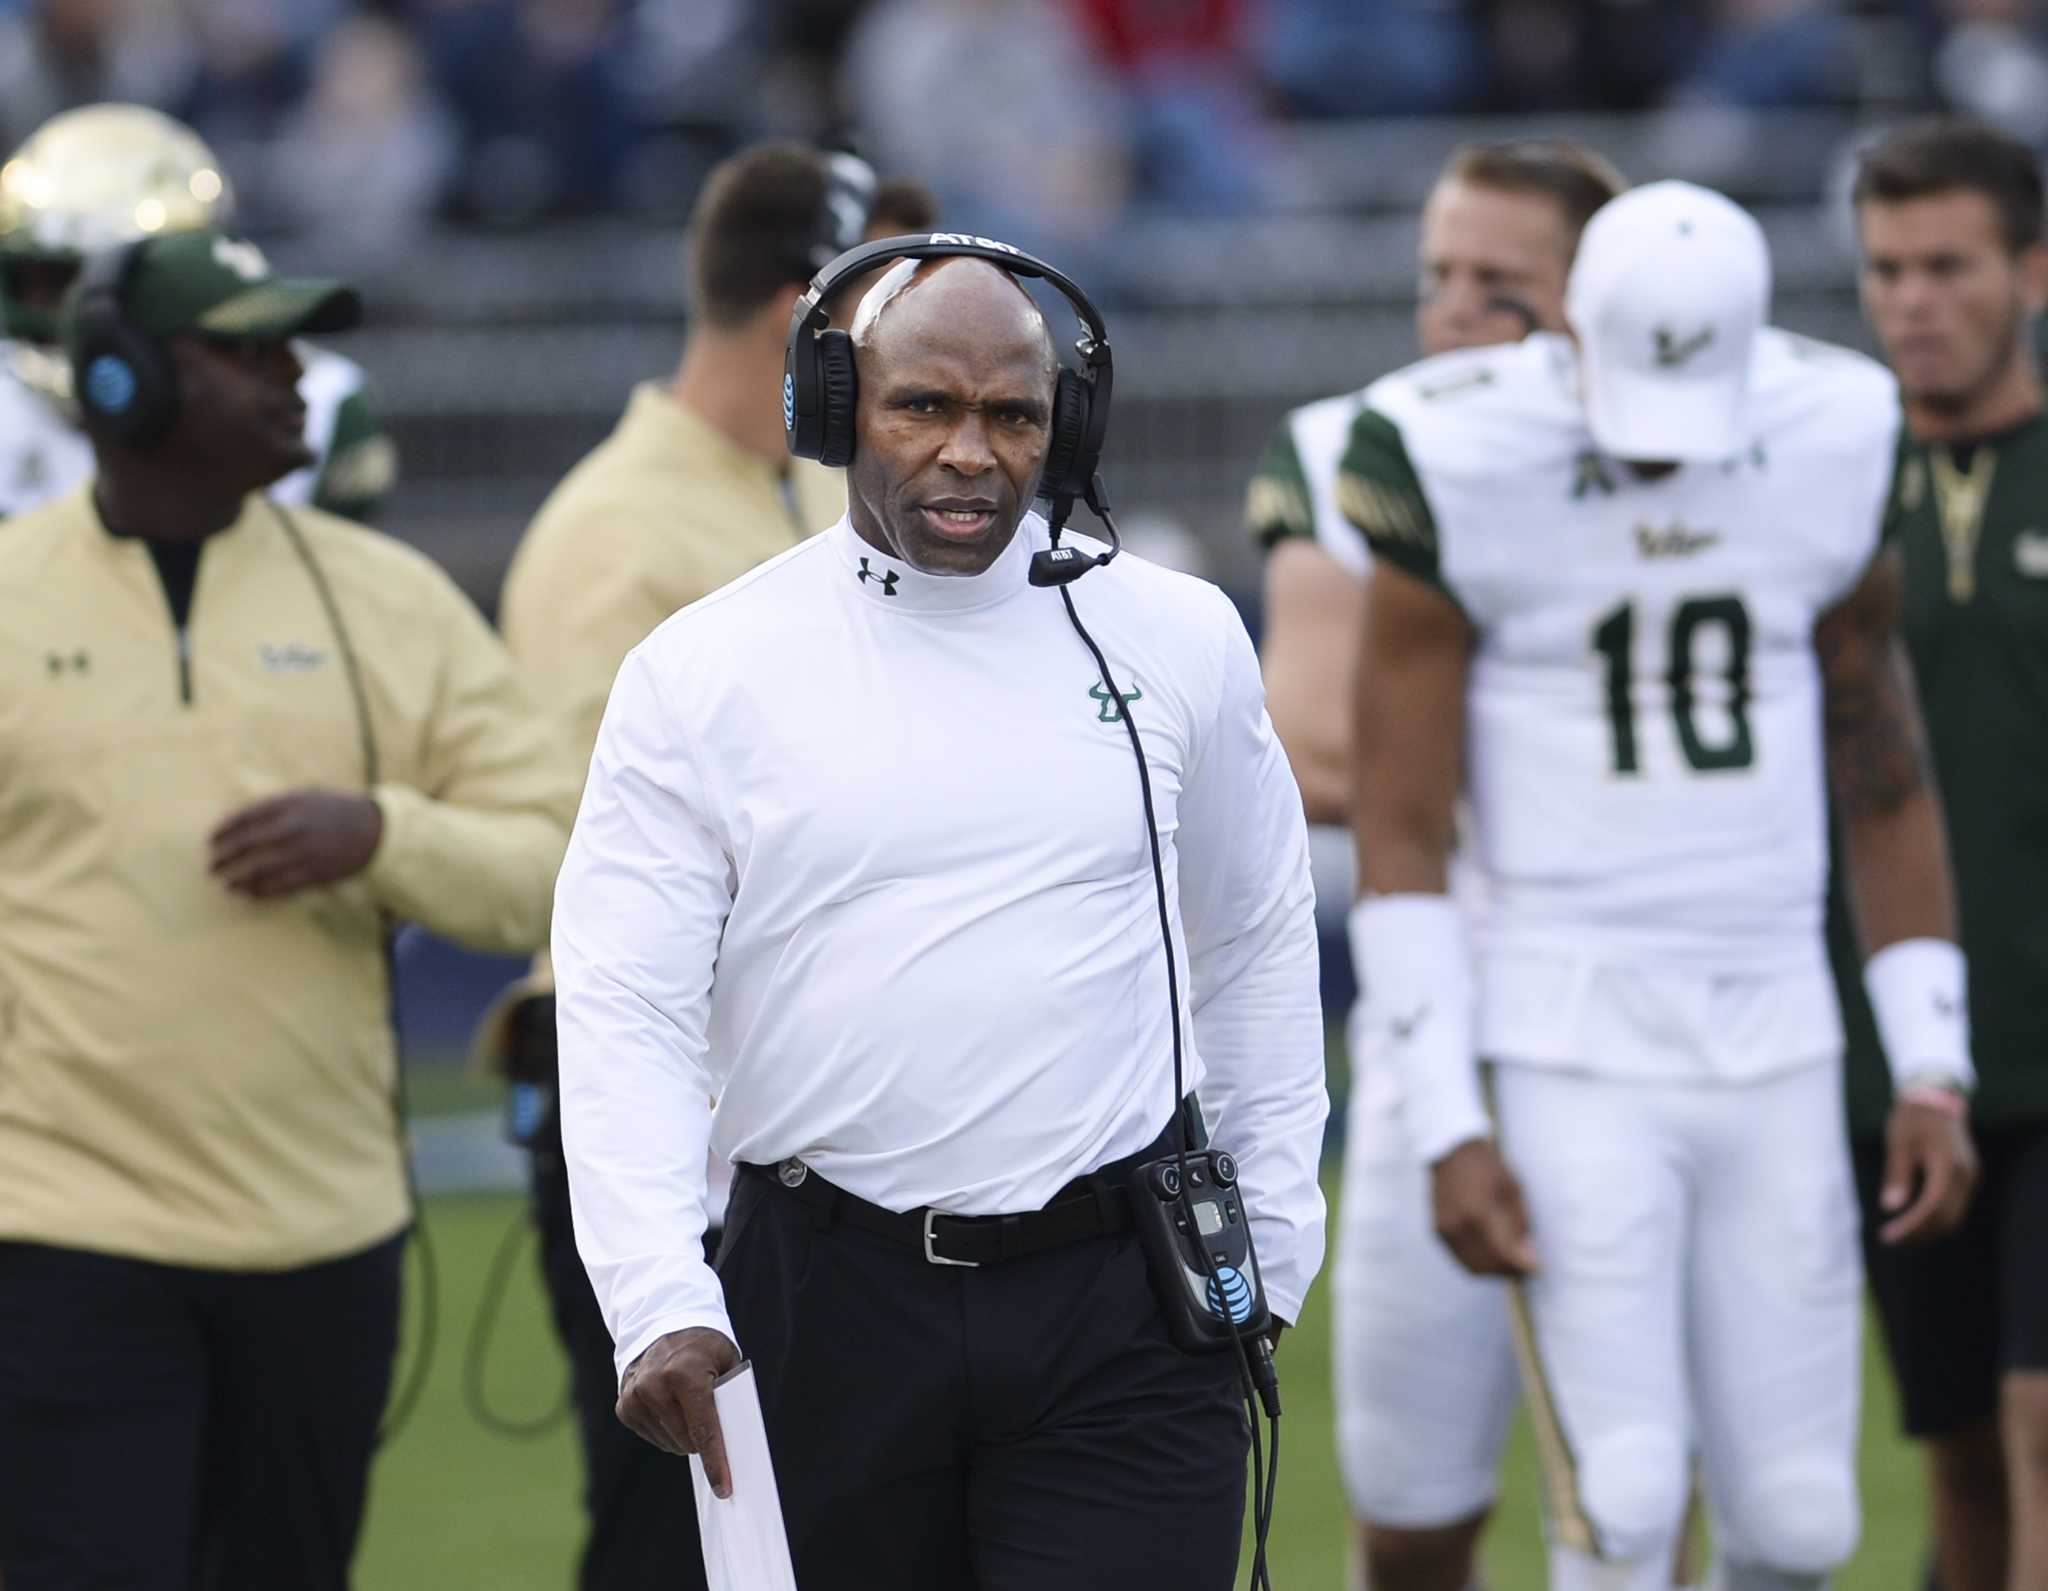 South Florida's Charlie Strong not banking on familiarity with Texas Tech